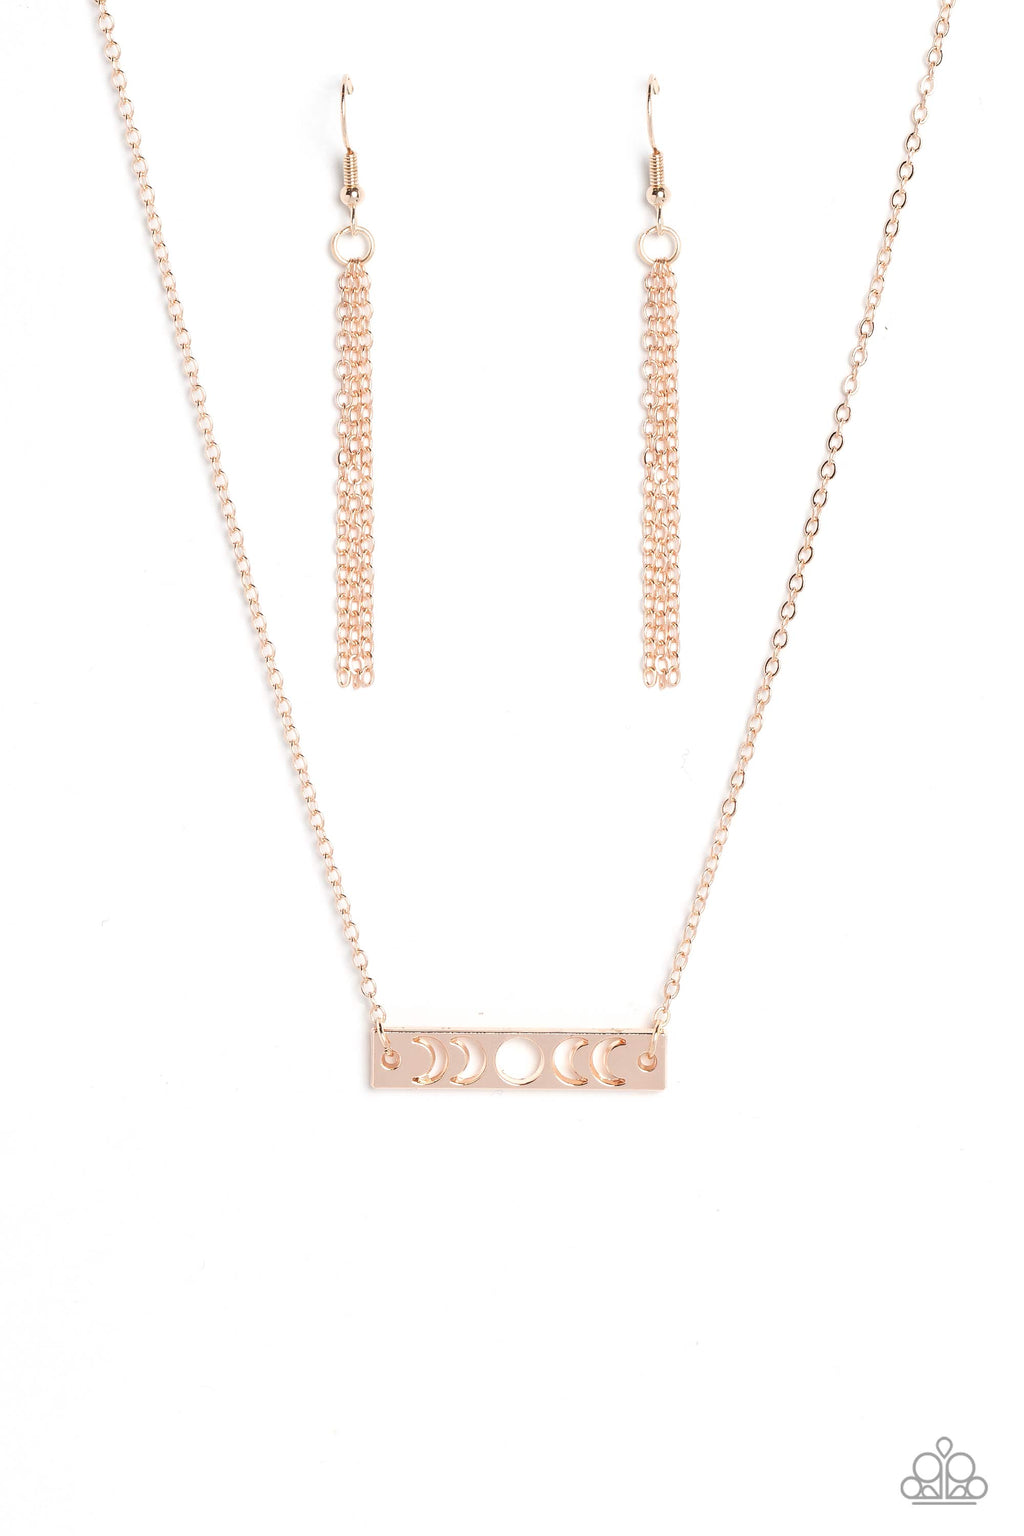 five-dollar-jewelry-lunar-or-later-rose-gold-paparazzi-accessories